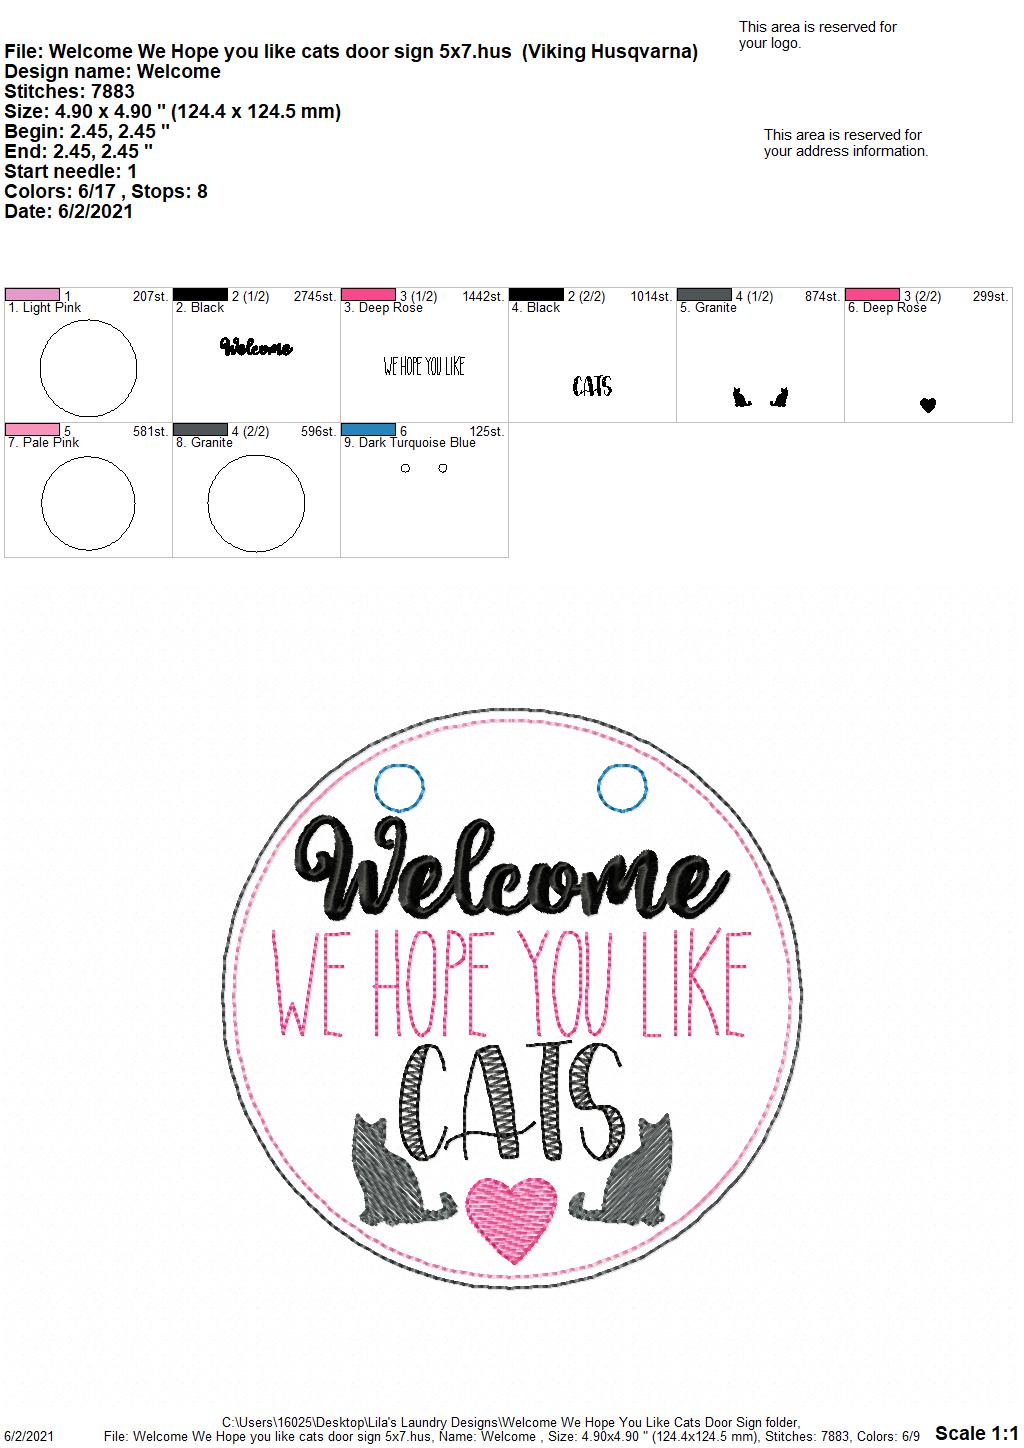 Welcome We Hope You Like Cats Door Hanger - 3 sizes - Digital Embroidery Design